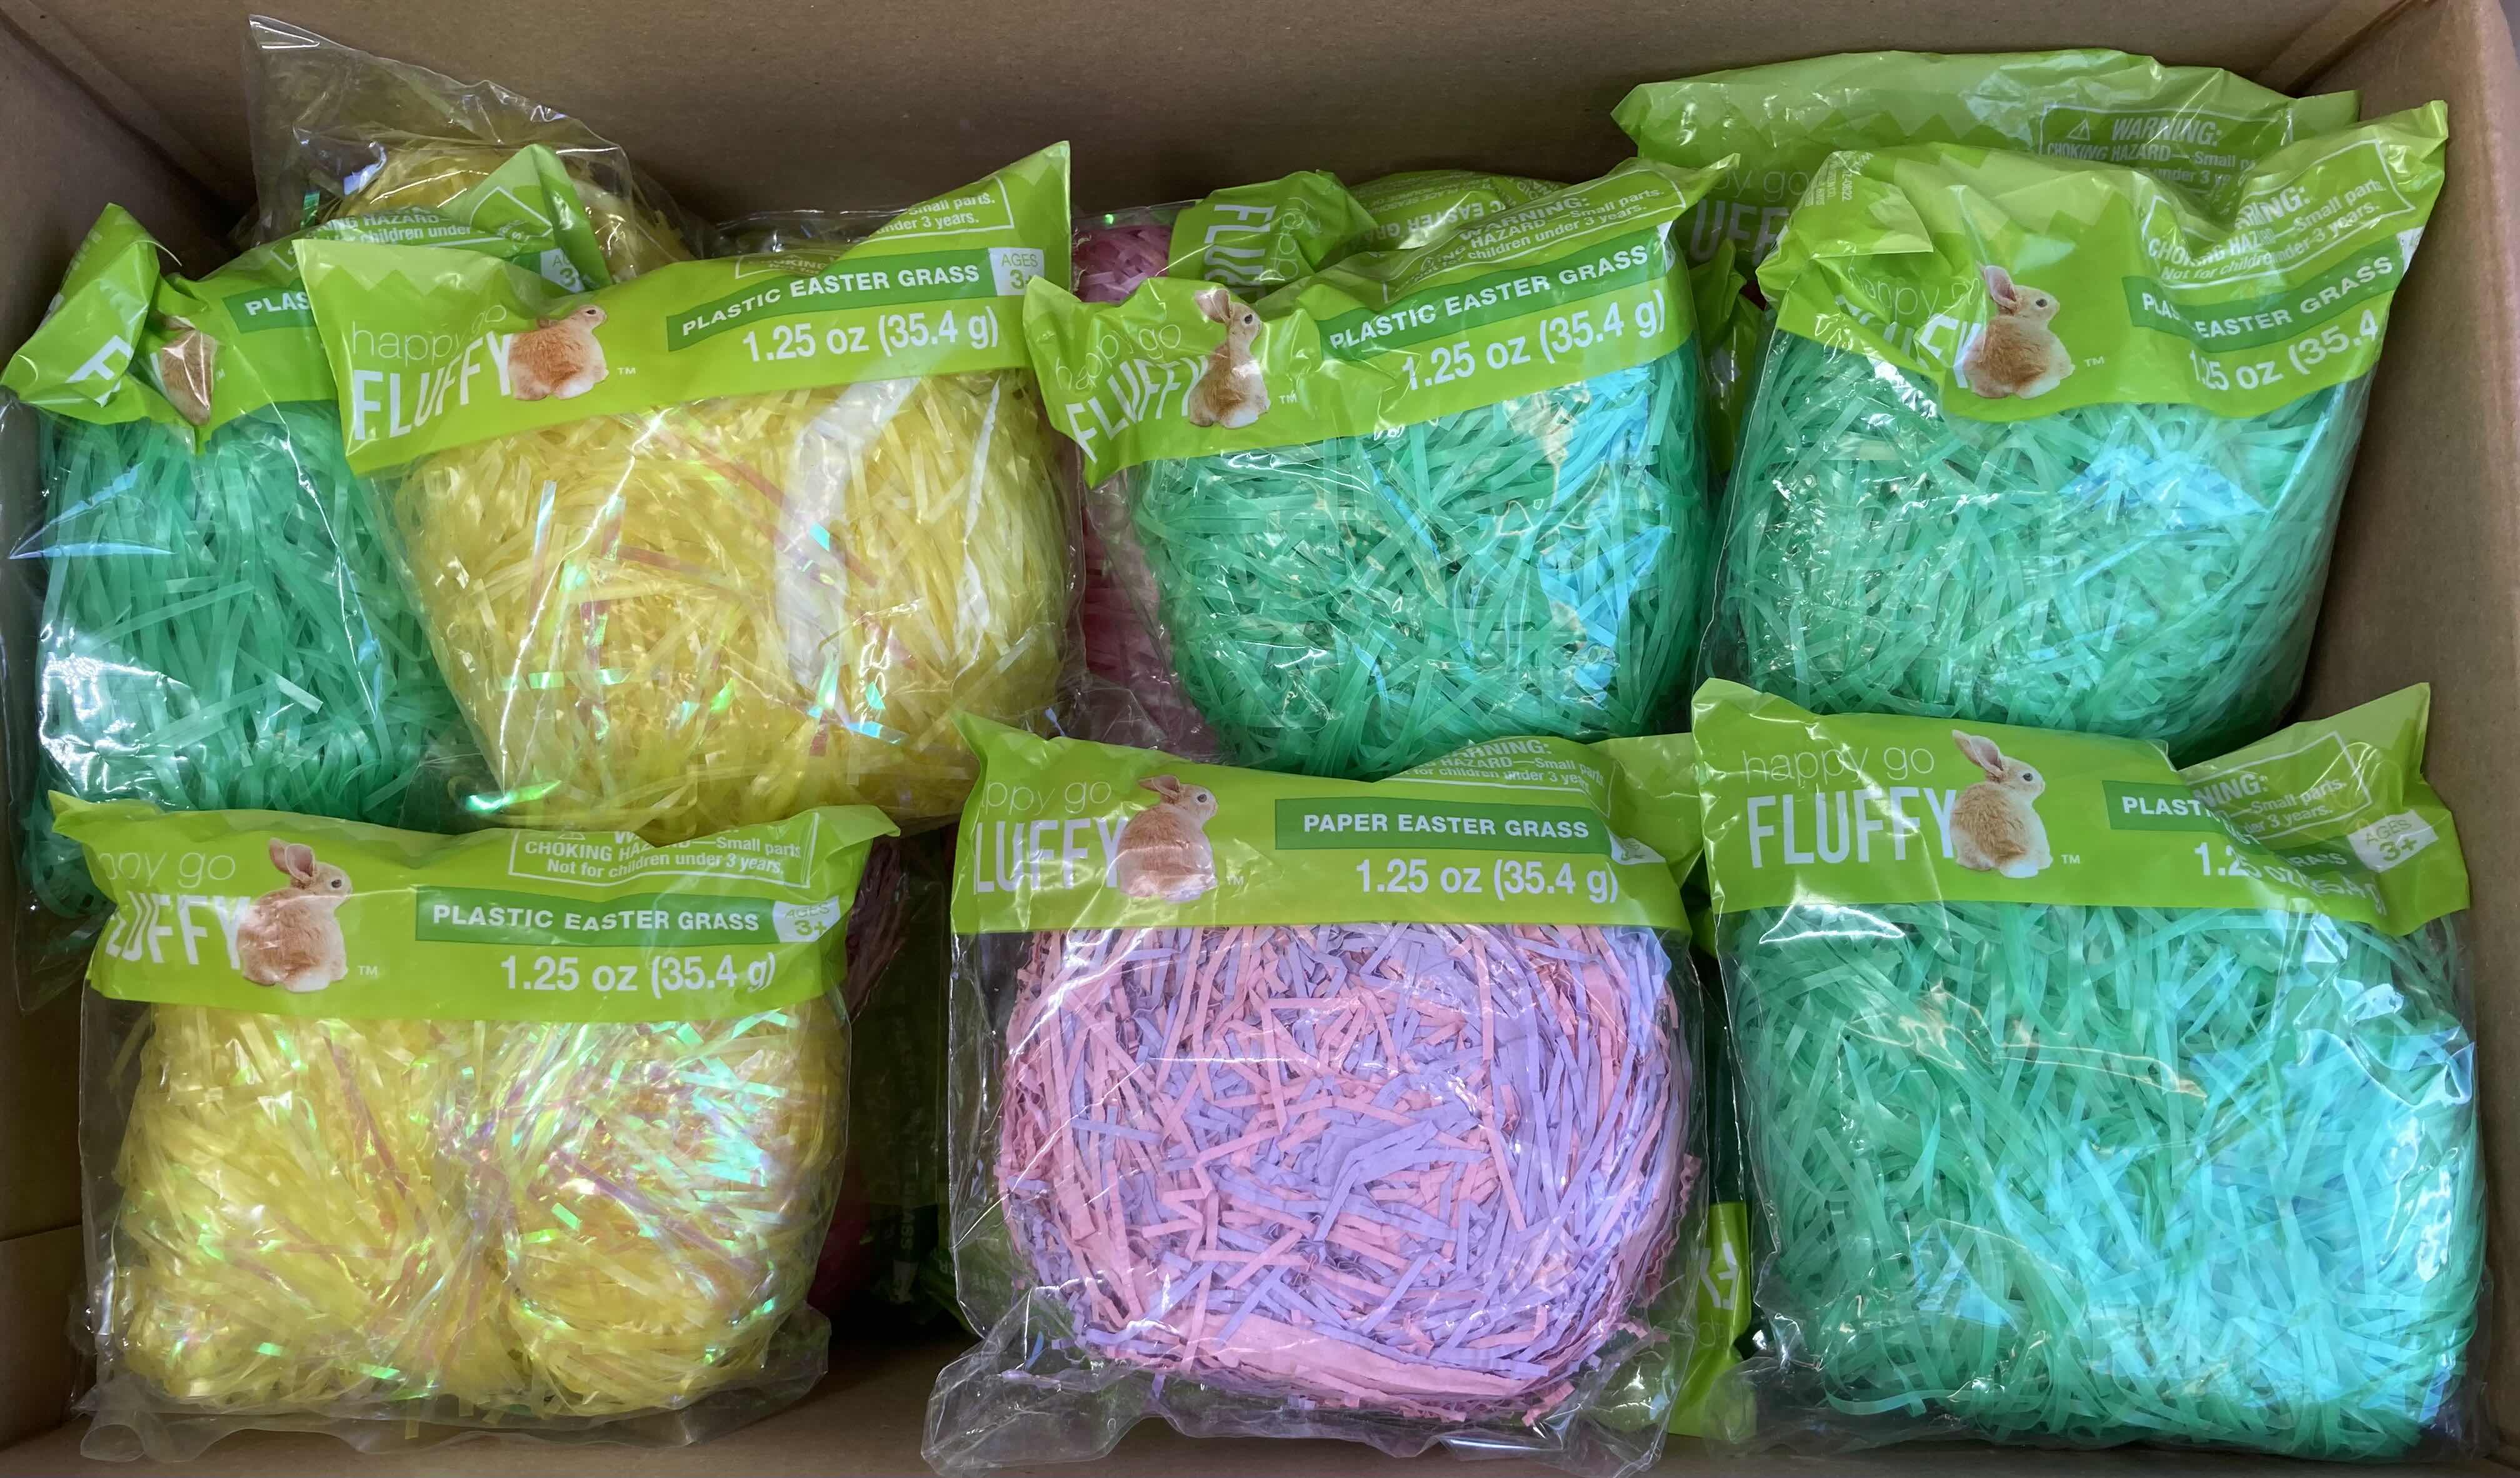 Photo 1 of NEW HAPPY GO FLUFFY PAPER EASTER GRASS 1.25OZ BAGS (APPROX 40 BAGS PER CASE)